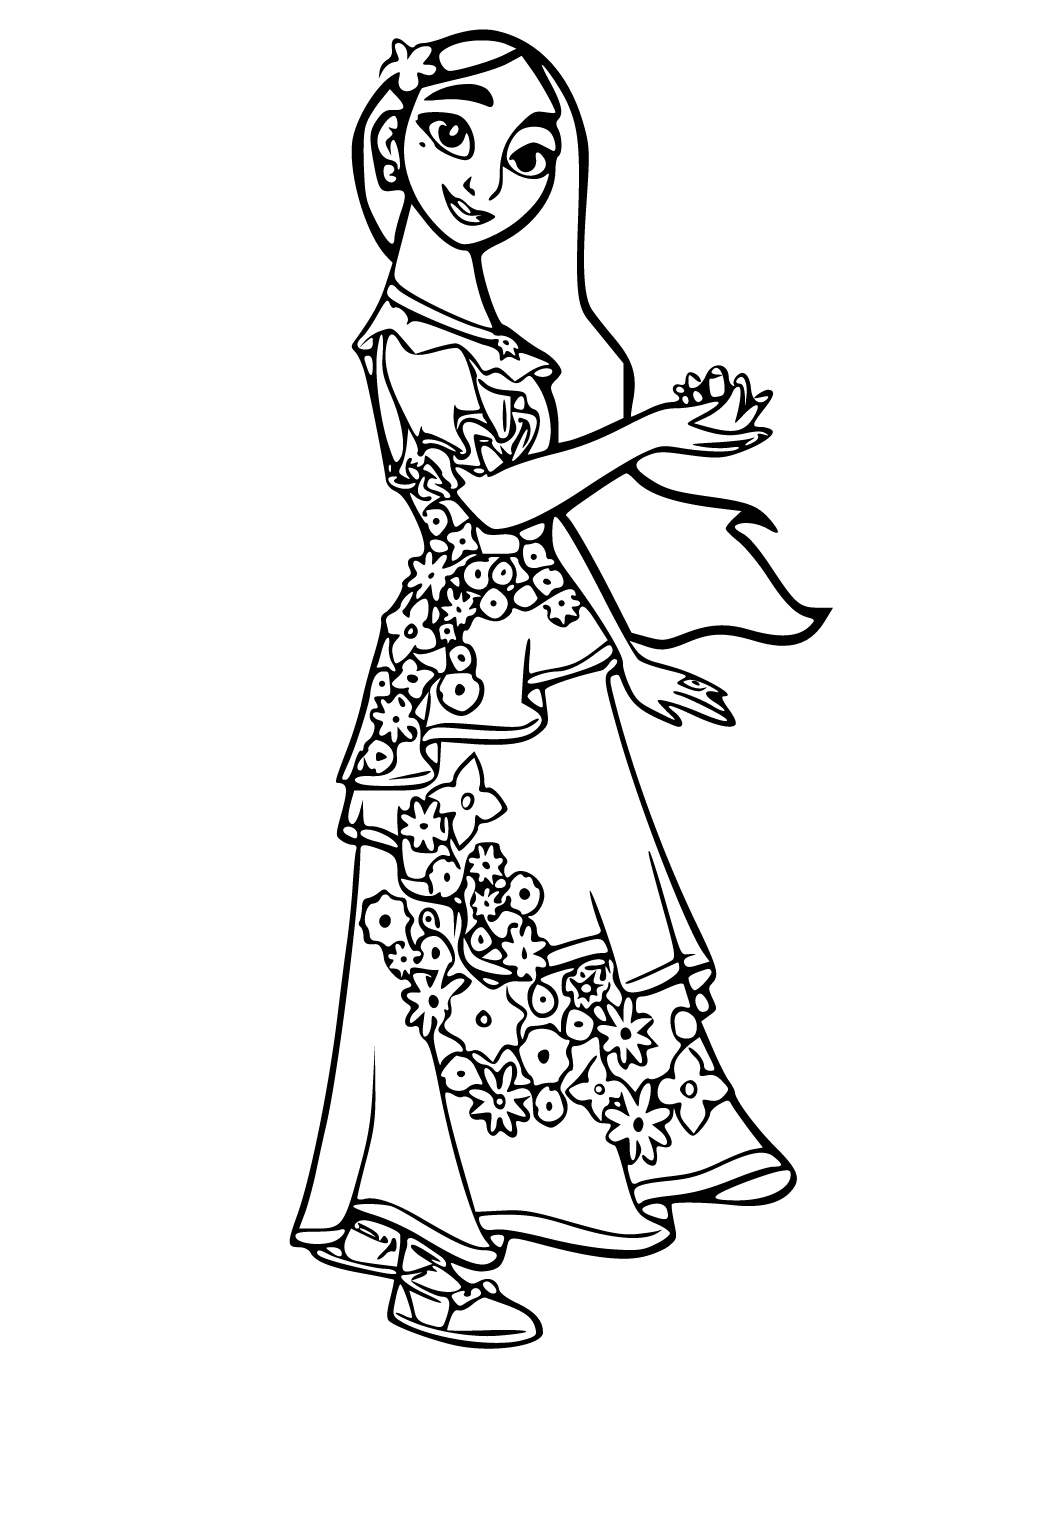 Free Printable Encanto Isabela Coloring Page, Sheet and Picture ...